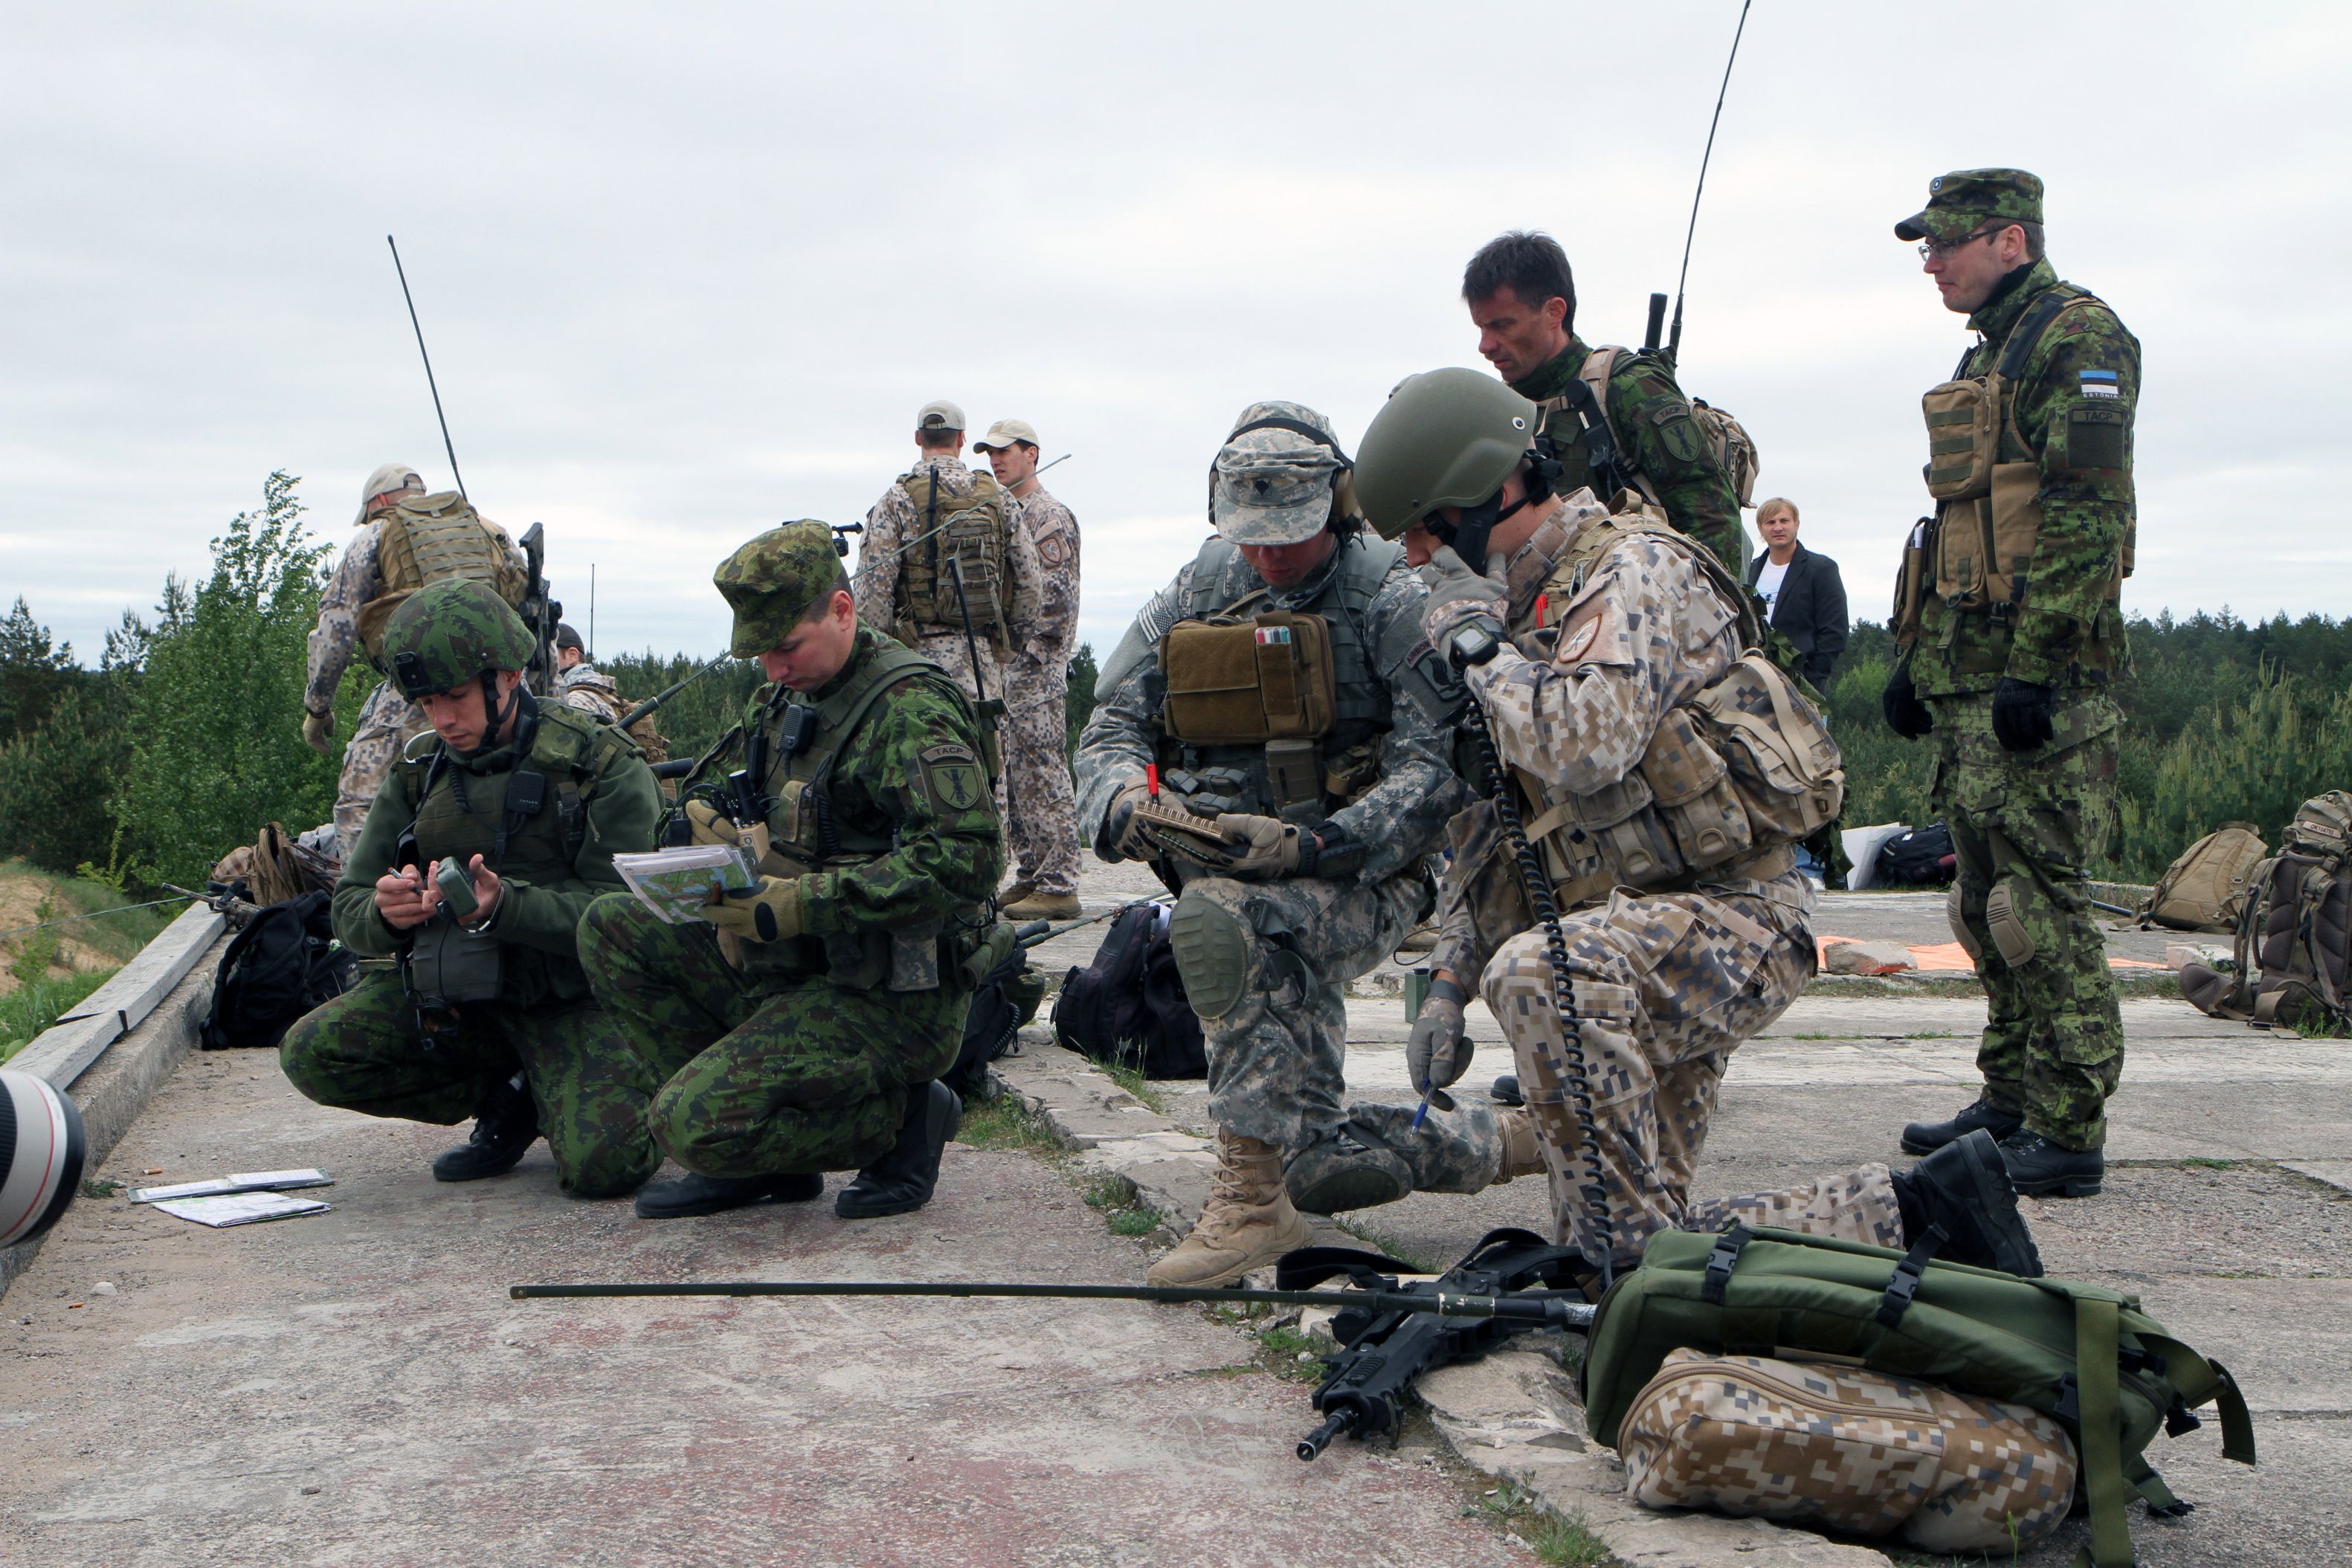 Paratroopers from Lithuania, Estonia, the U.S. and Latvia, participate in a Baltic forces regional training event at Military Base Adazi, Latvia